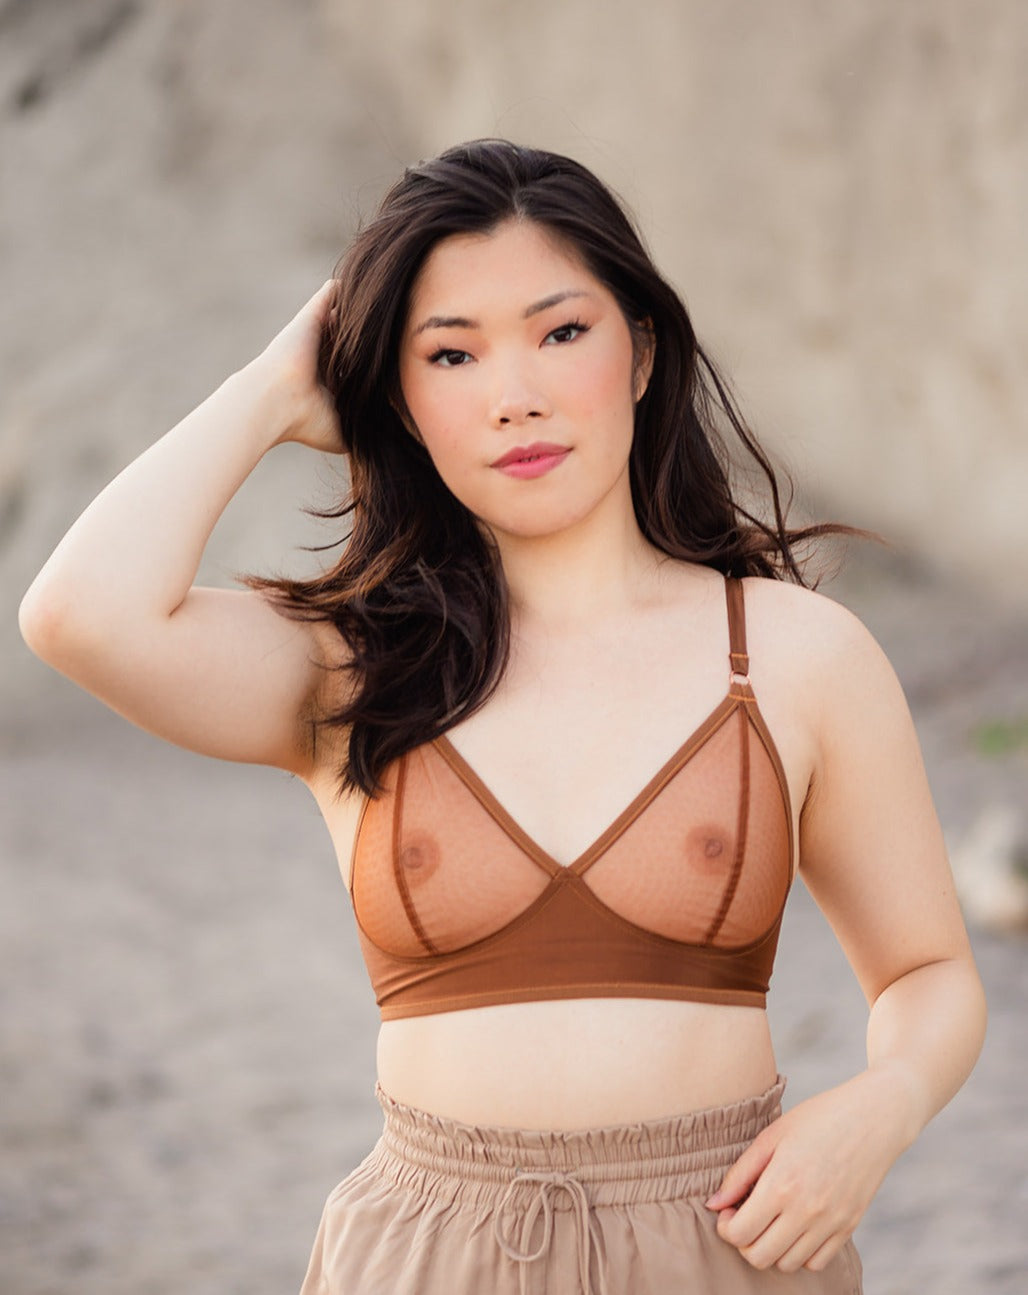 Rubies Bras female client and model wearing our Sahaara Sheers in copper.